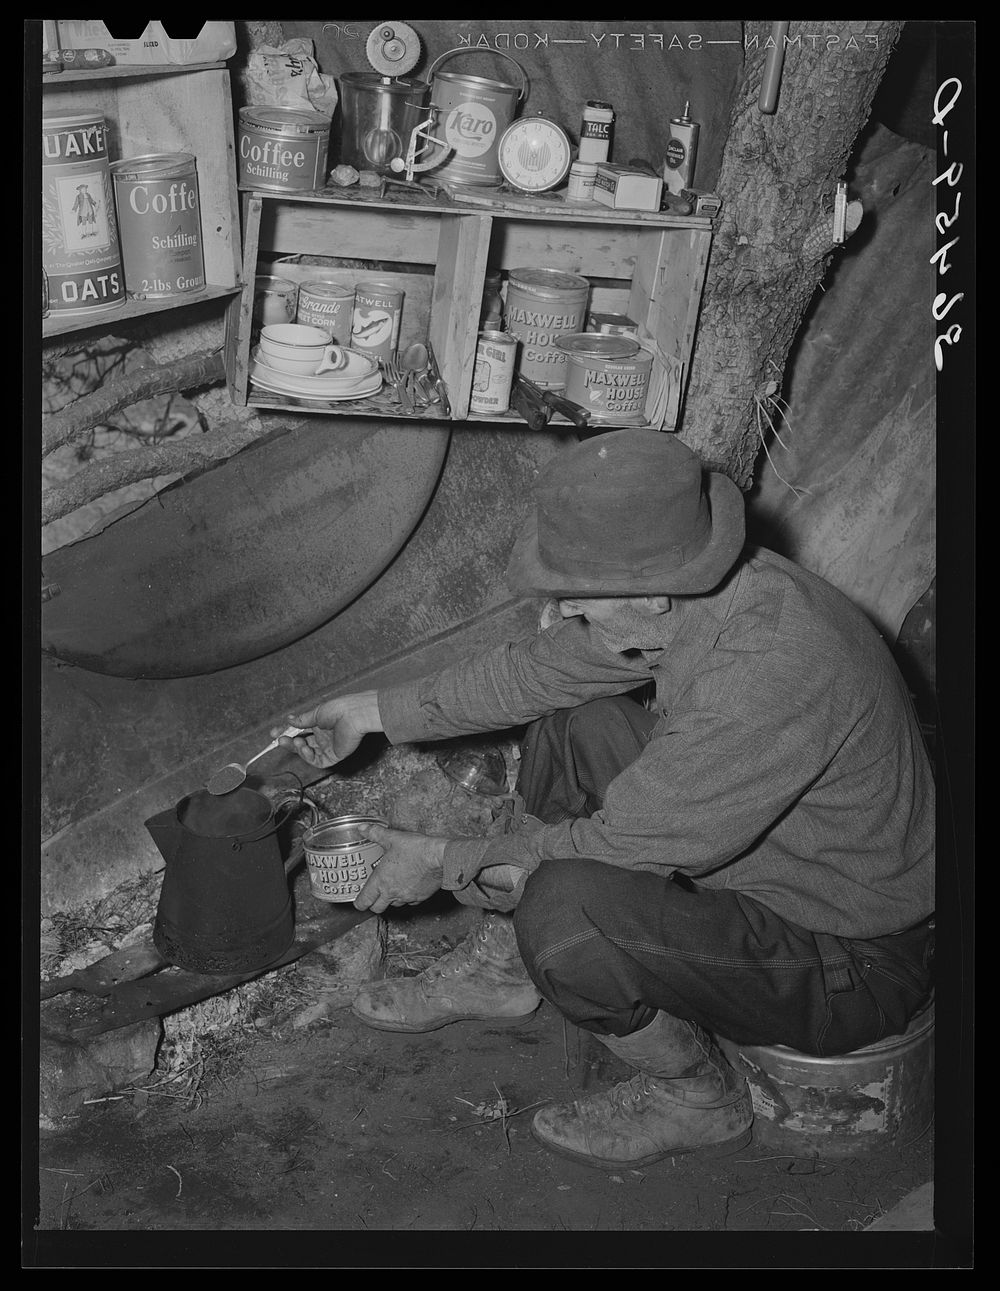 Eugene Davis, gold prospector, making a pot of coffee in his shack on his diggings. Pinos Altos, New Mexico by Russell Lee